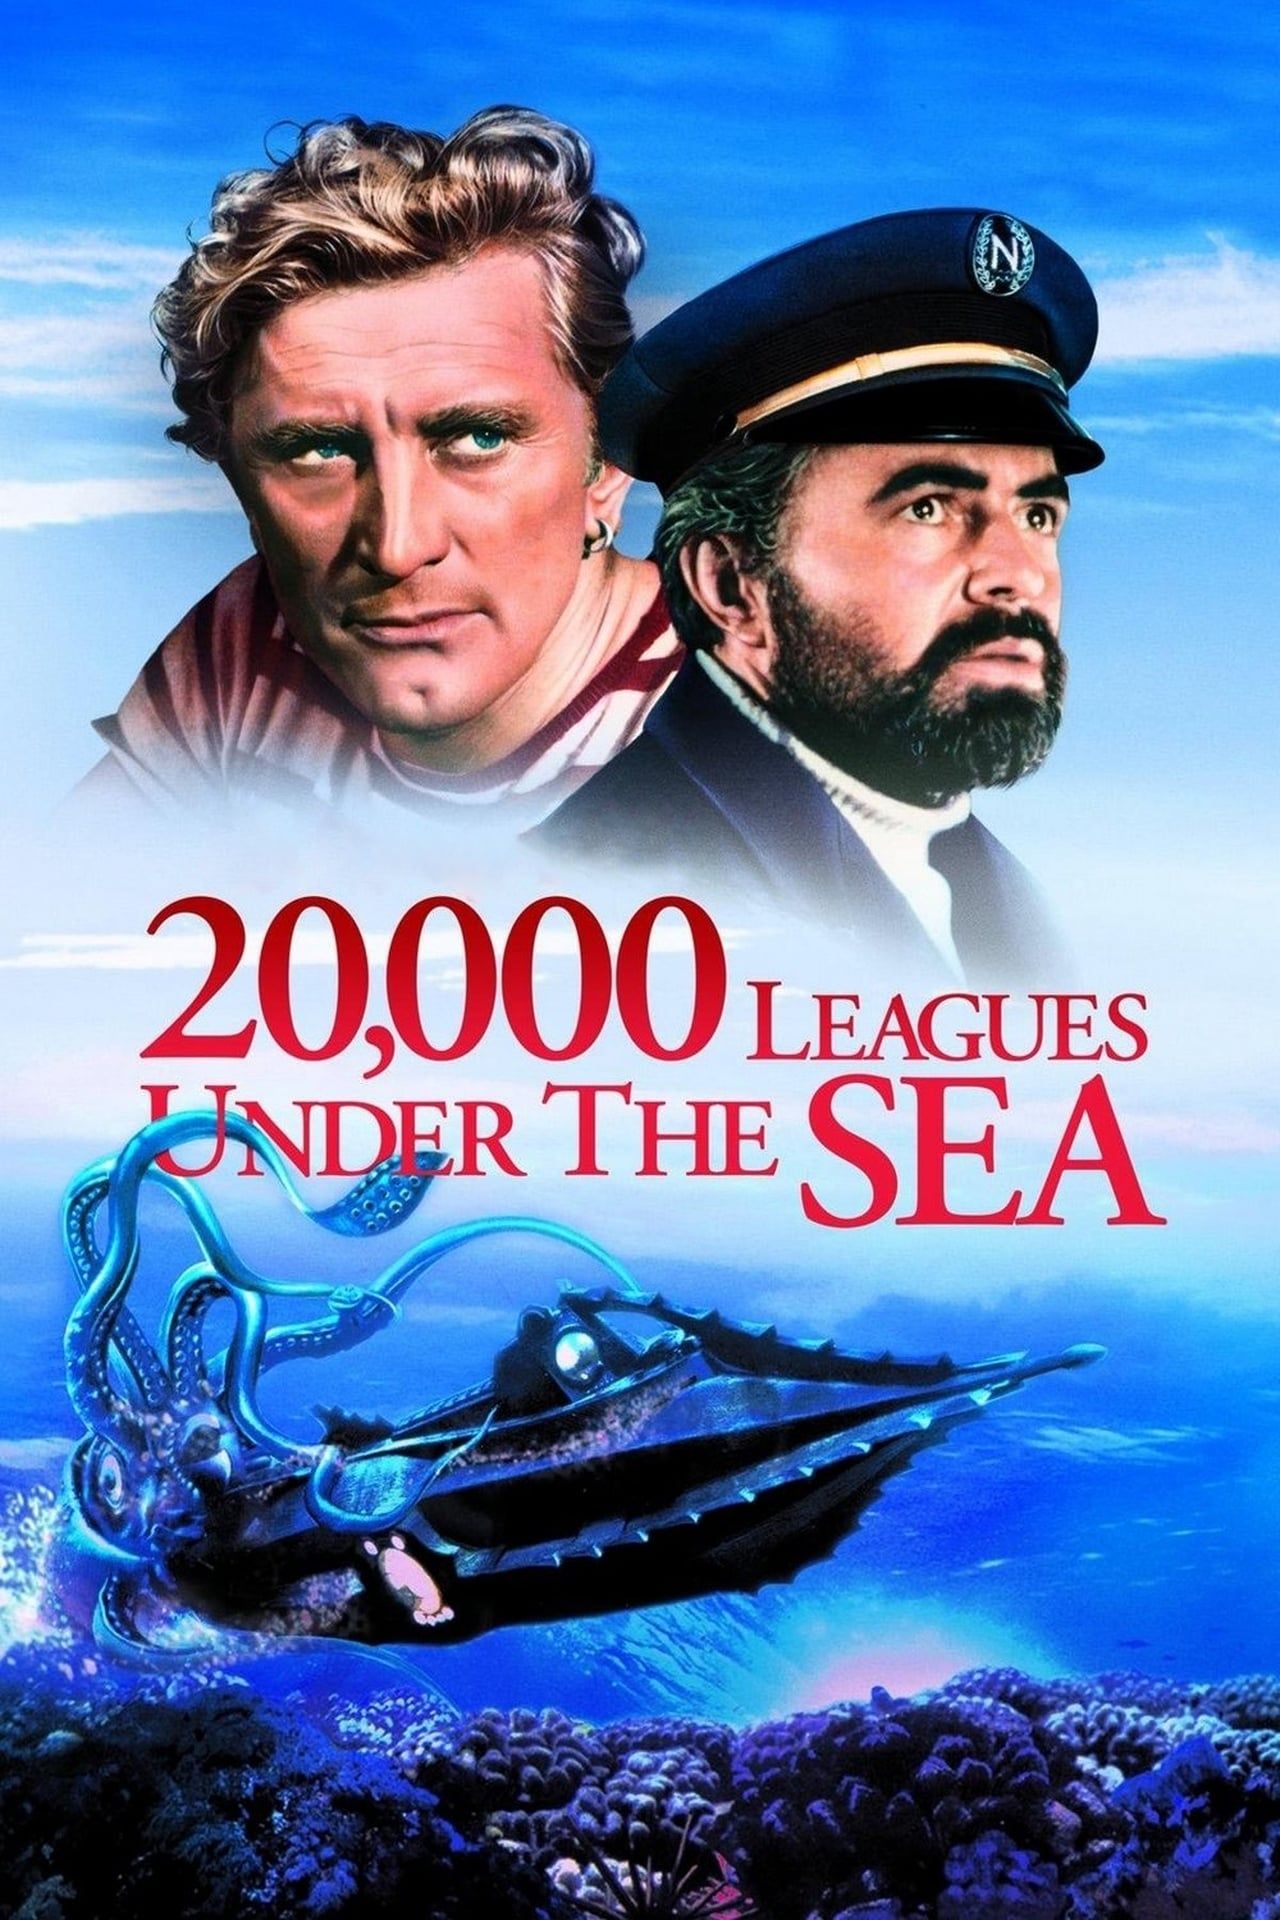 20,000 Leagues under the sea poster showing a submarine being attacked by a sea creature